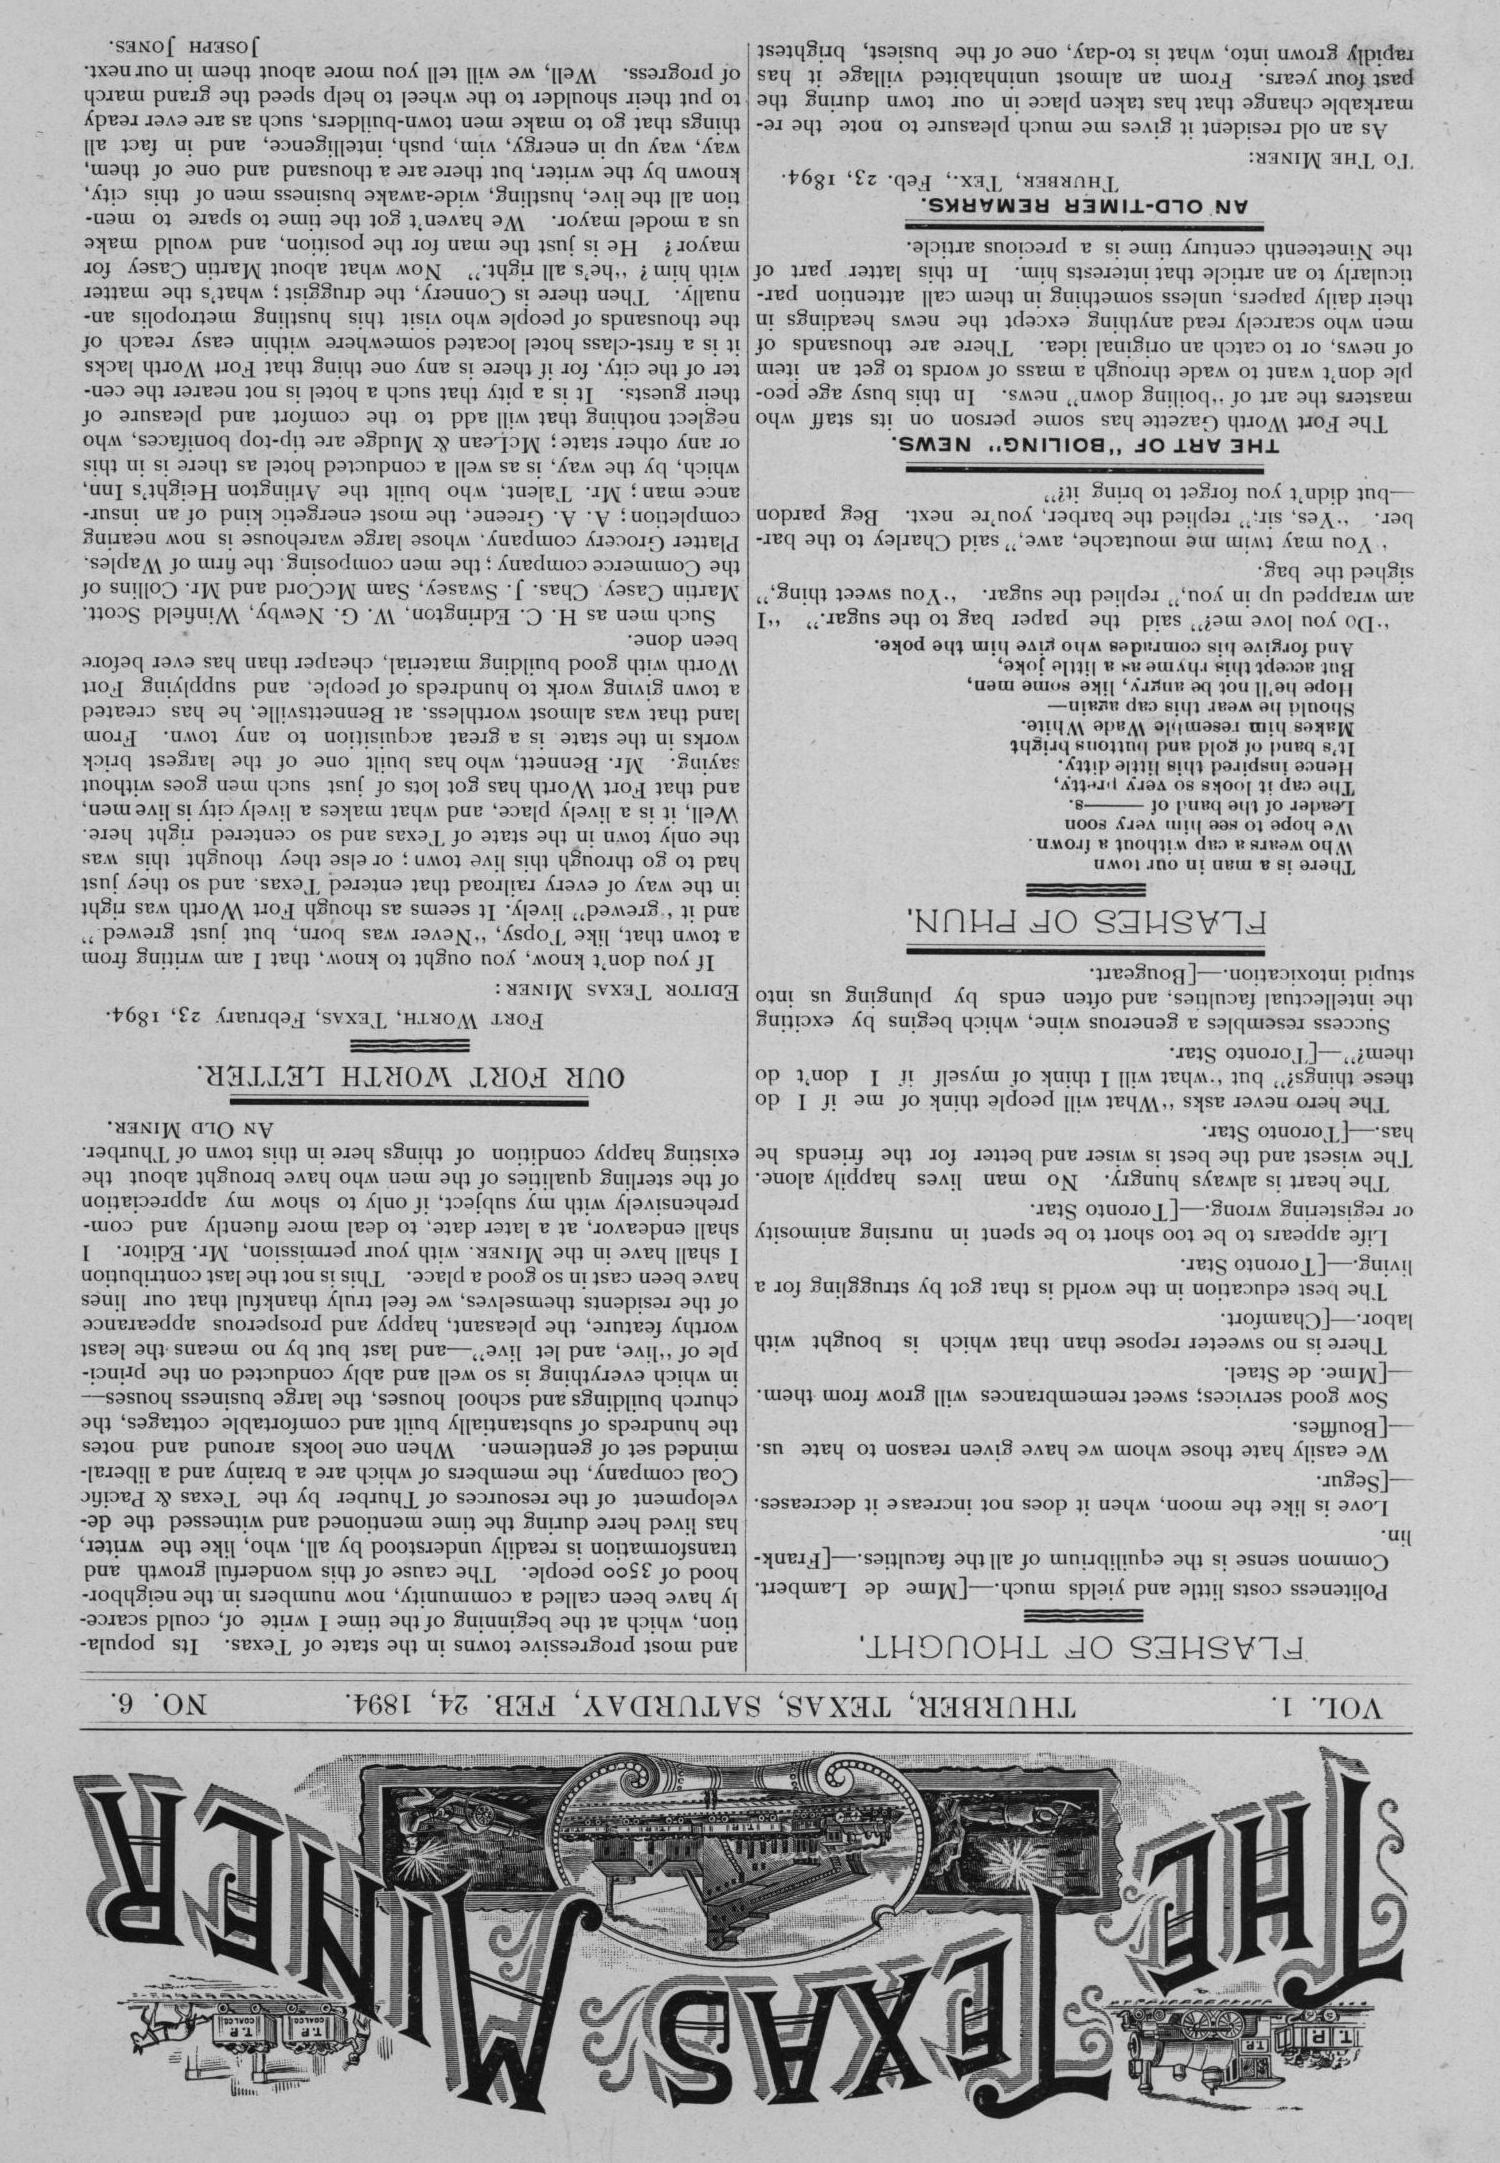 The Texas Miner, Volume 1, Number 6, February 24, 1894
                                                
                                                    1
                                                